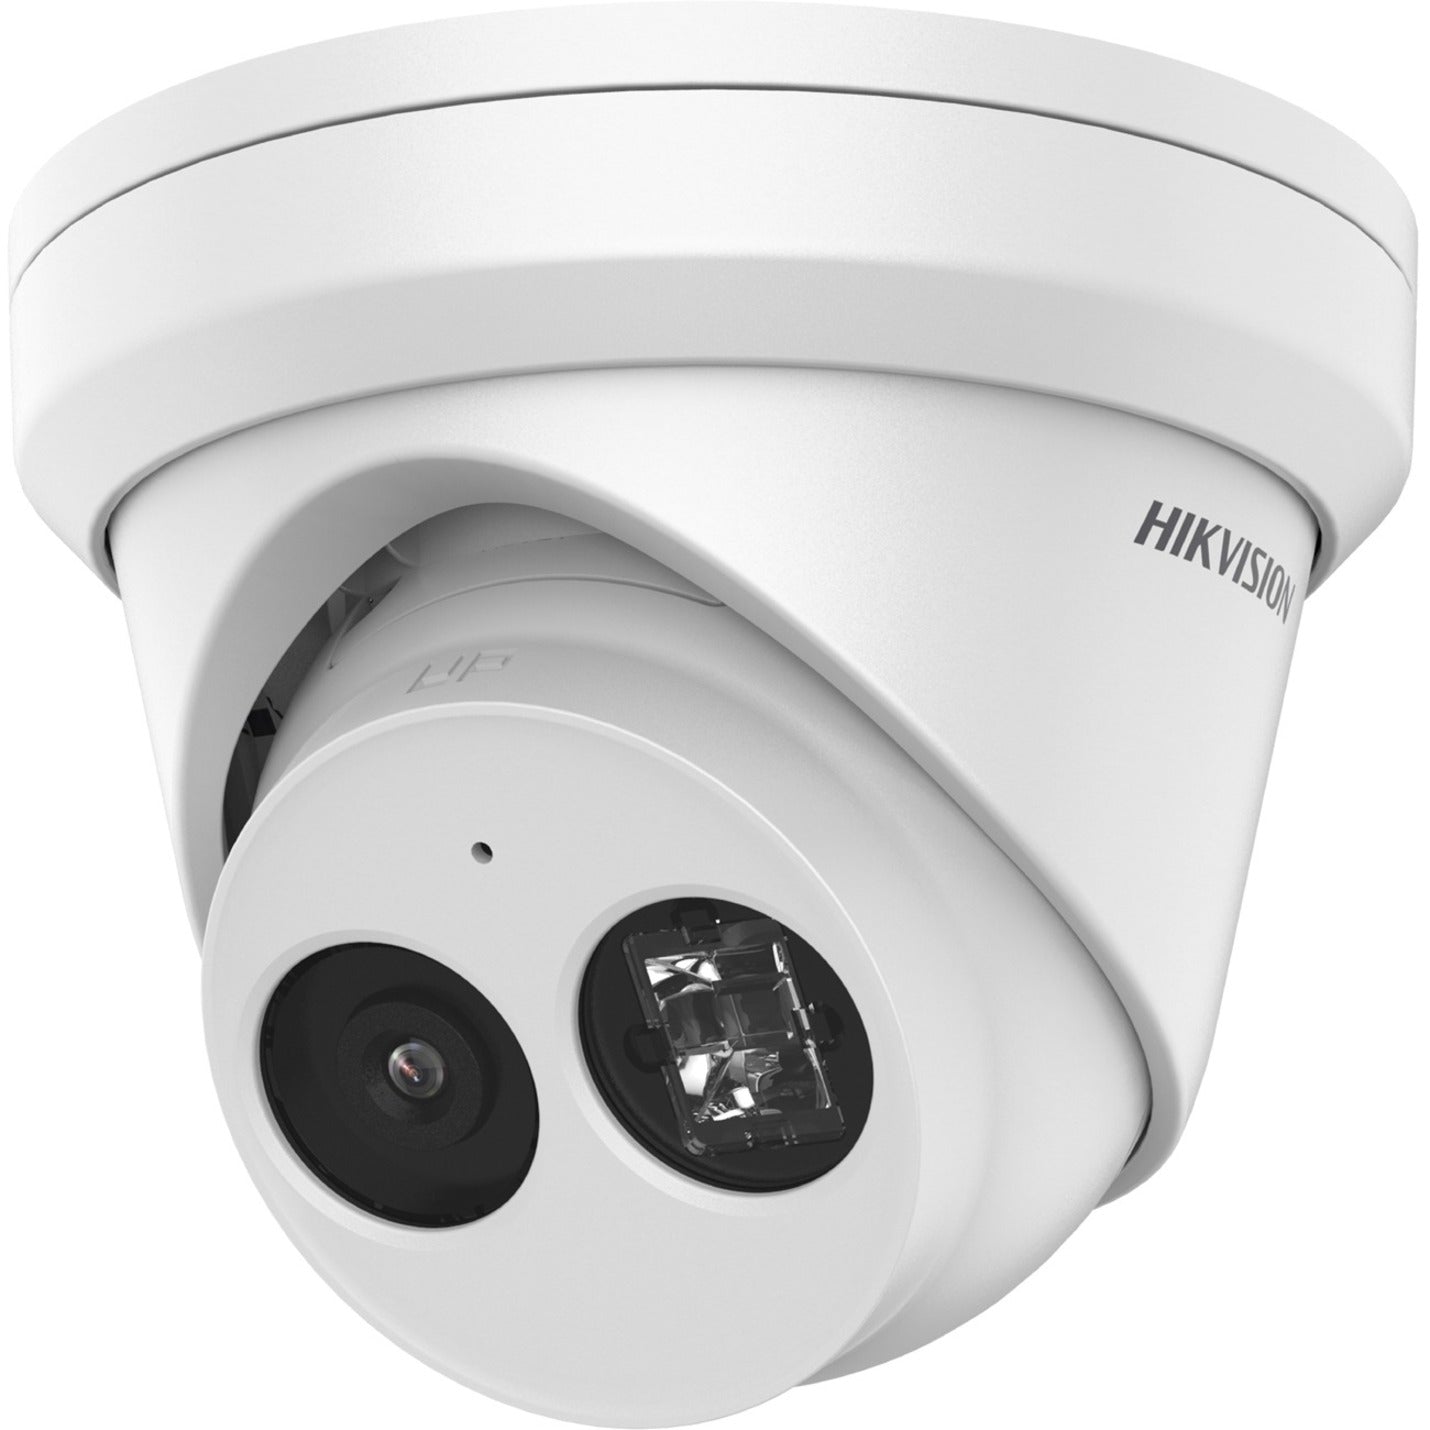 Hikvision DS-2CD2323G2-IU 2.8MM 2 MP EXIR Fixed Turret Network Camera, D/N IR 2MP 2.8mm 107